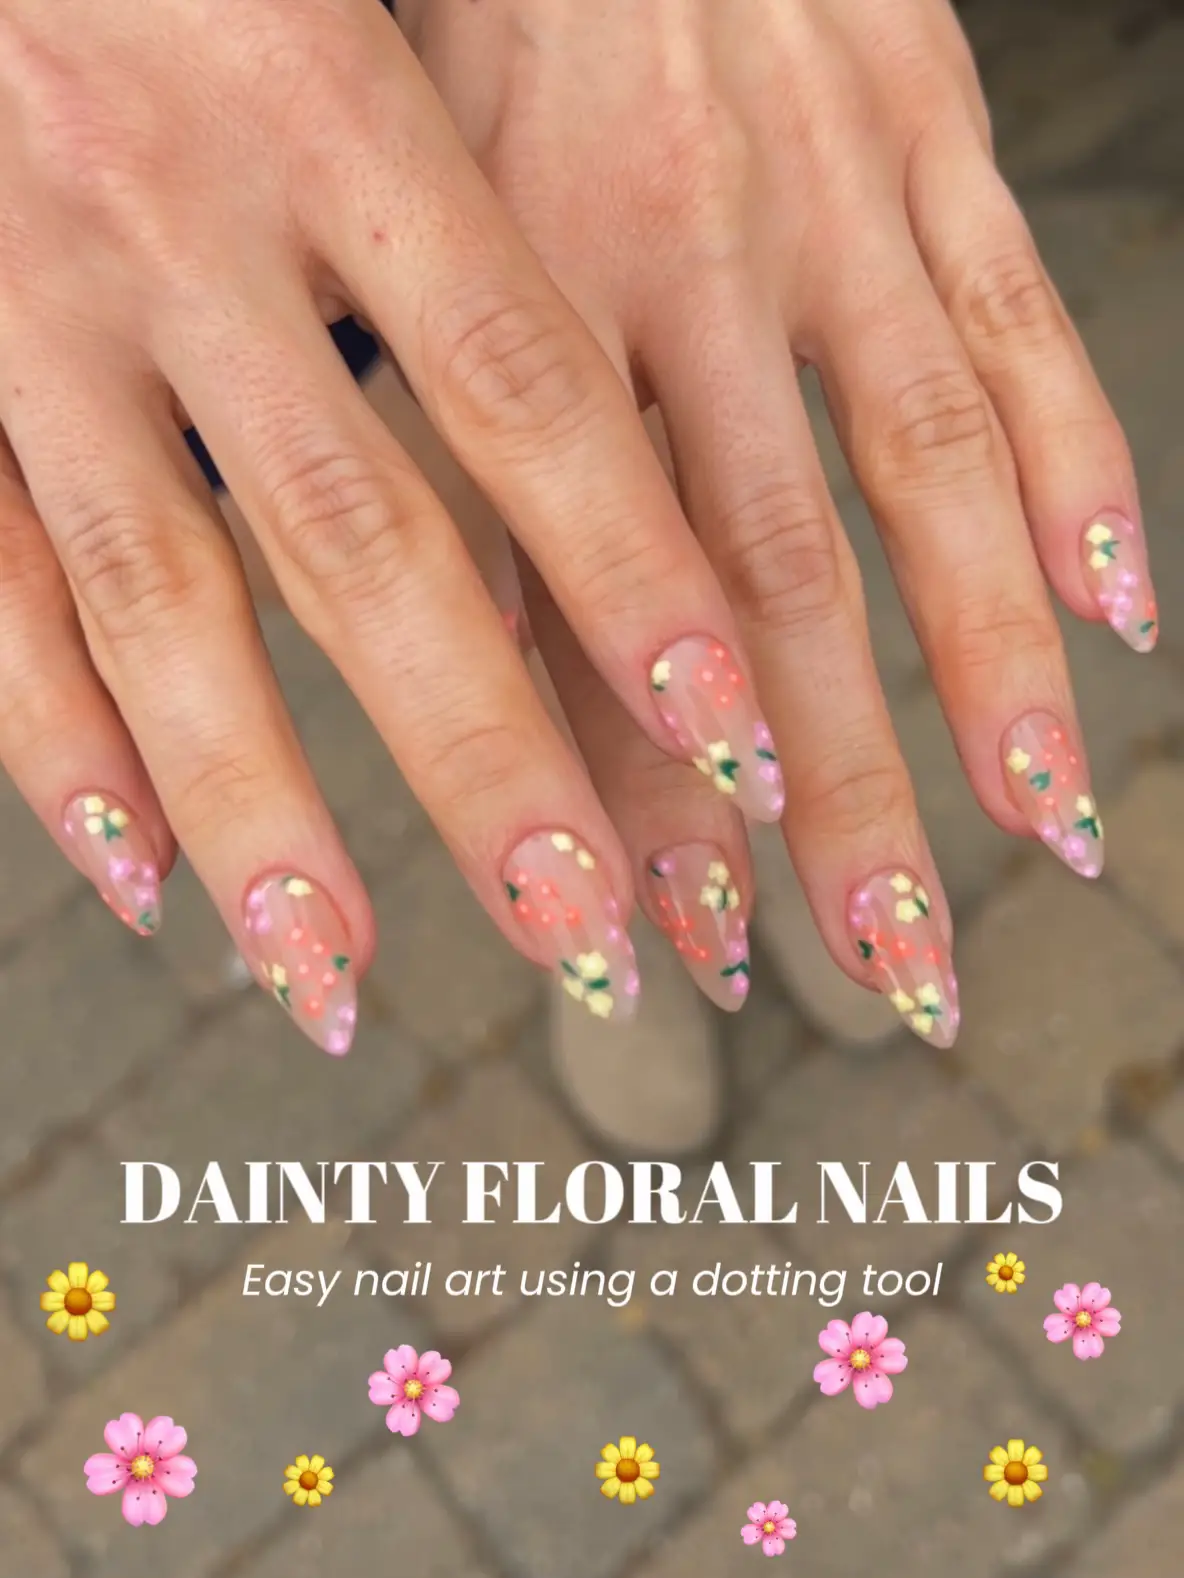 Easy floral nail art using a dotting tool🌸🌼